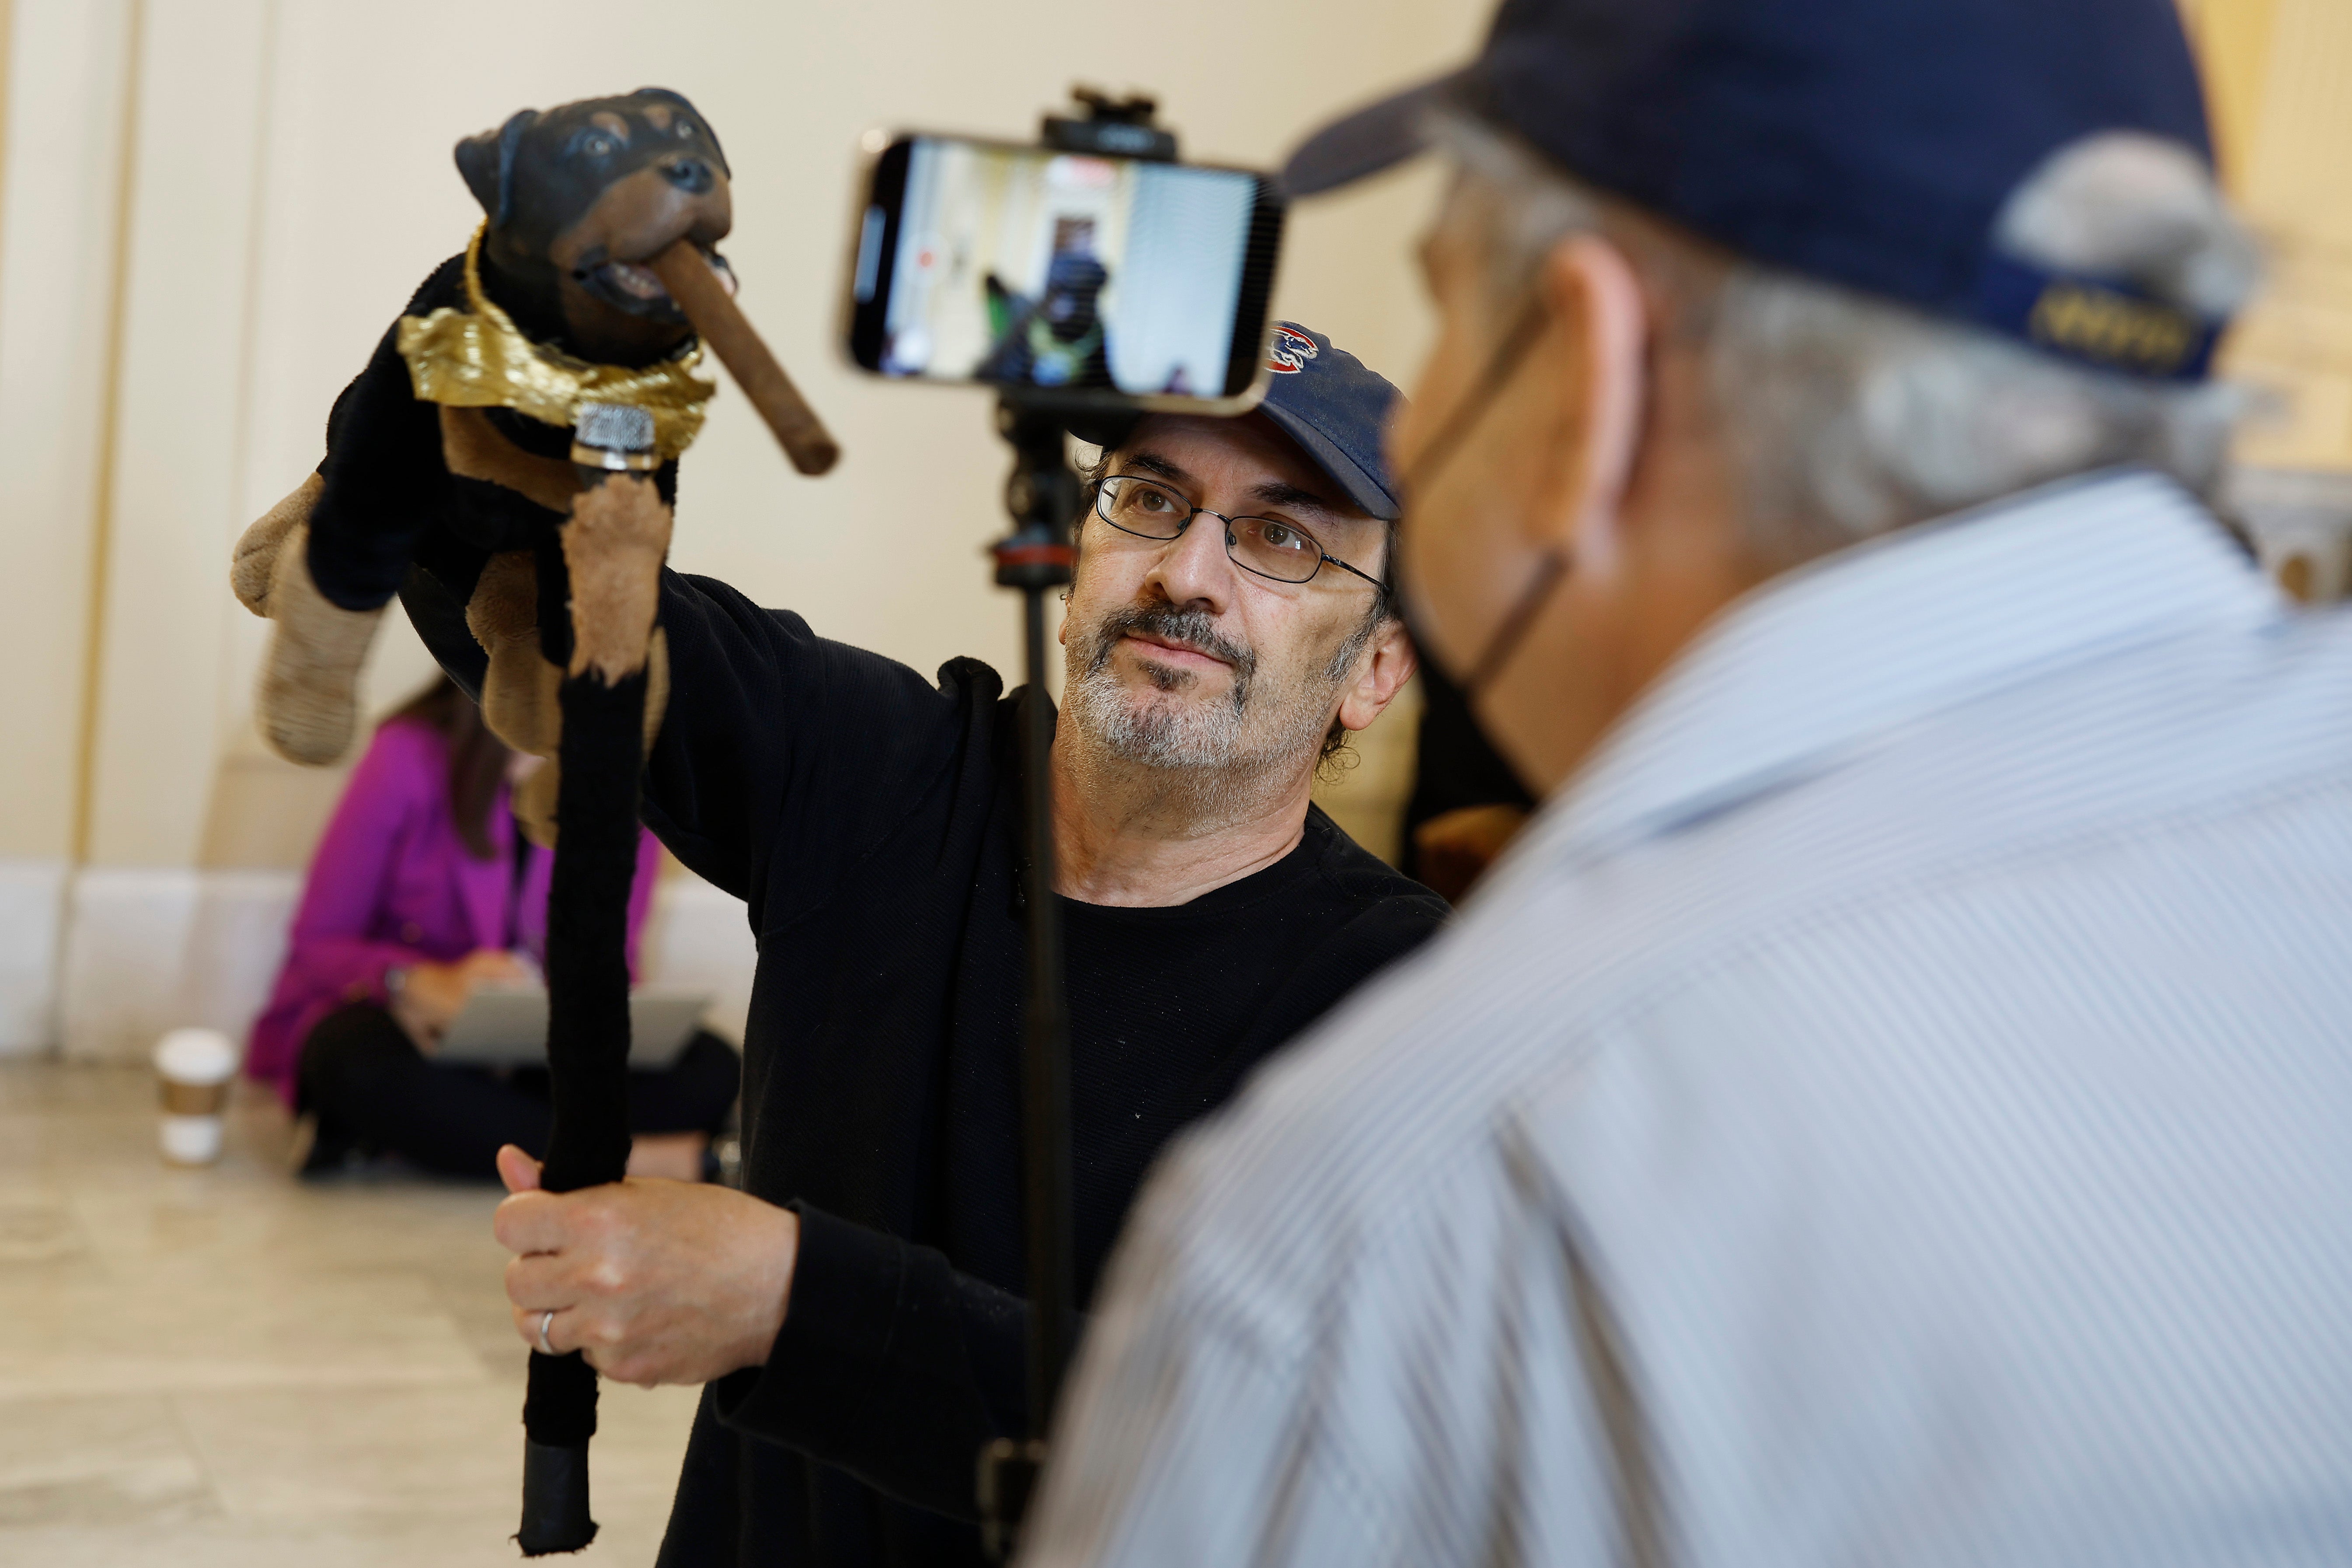 Actor and comedian Robert Smigel performs as Triumph the Insult Comic Dog in the hallways outside the January 6th House select committee hearing